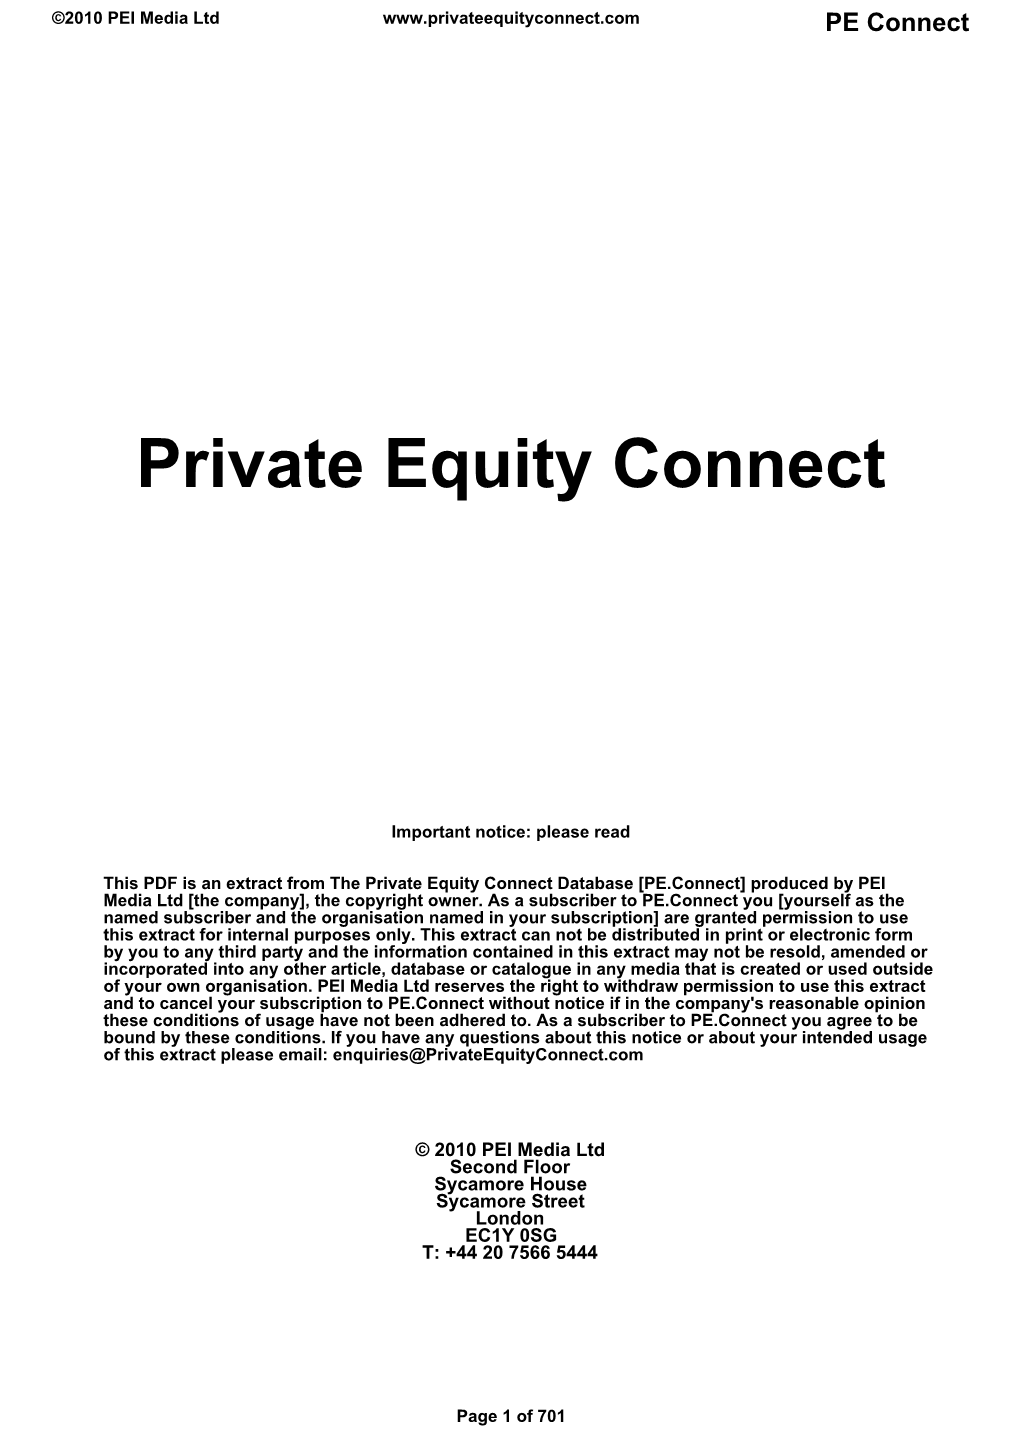 Private Equity Connect